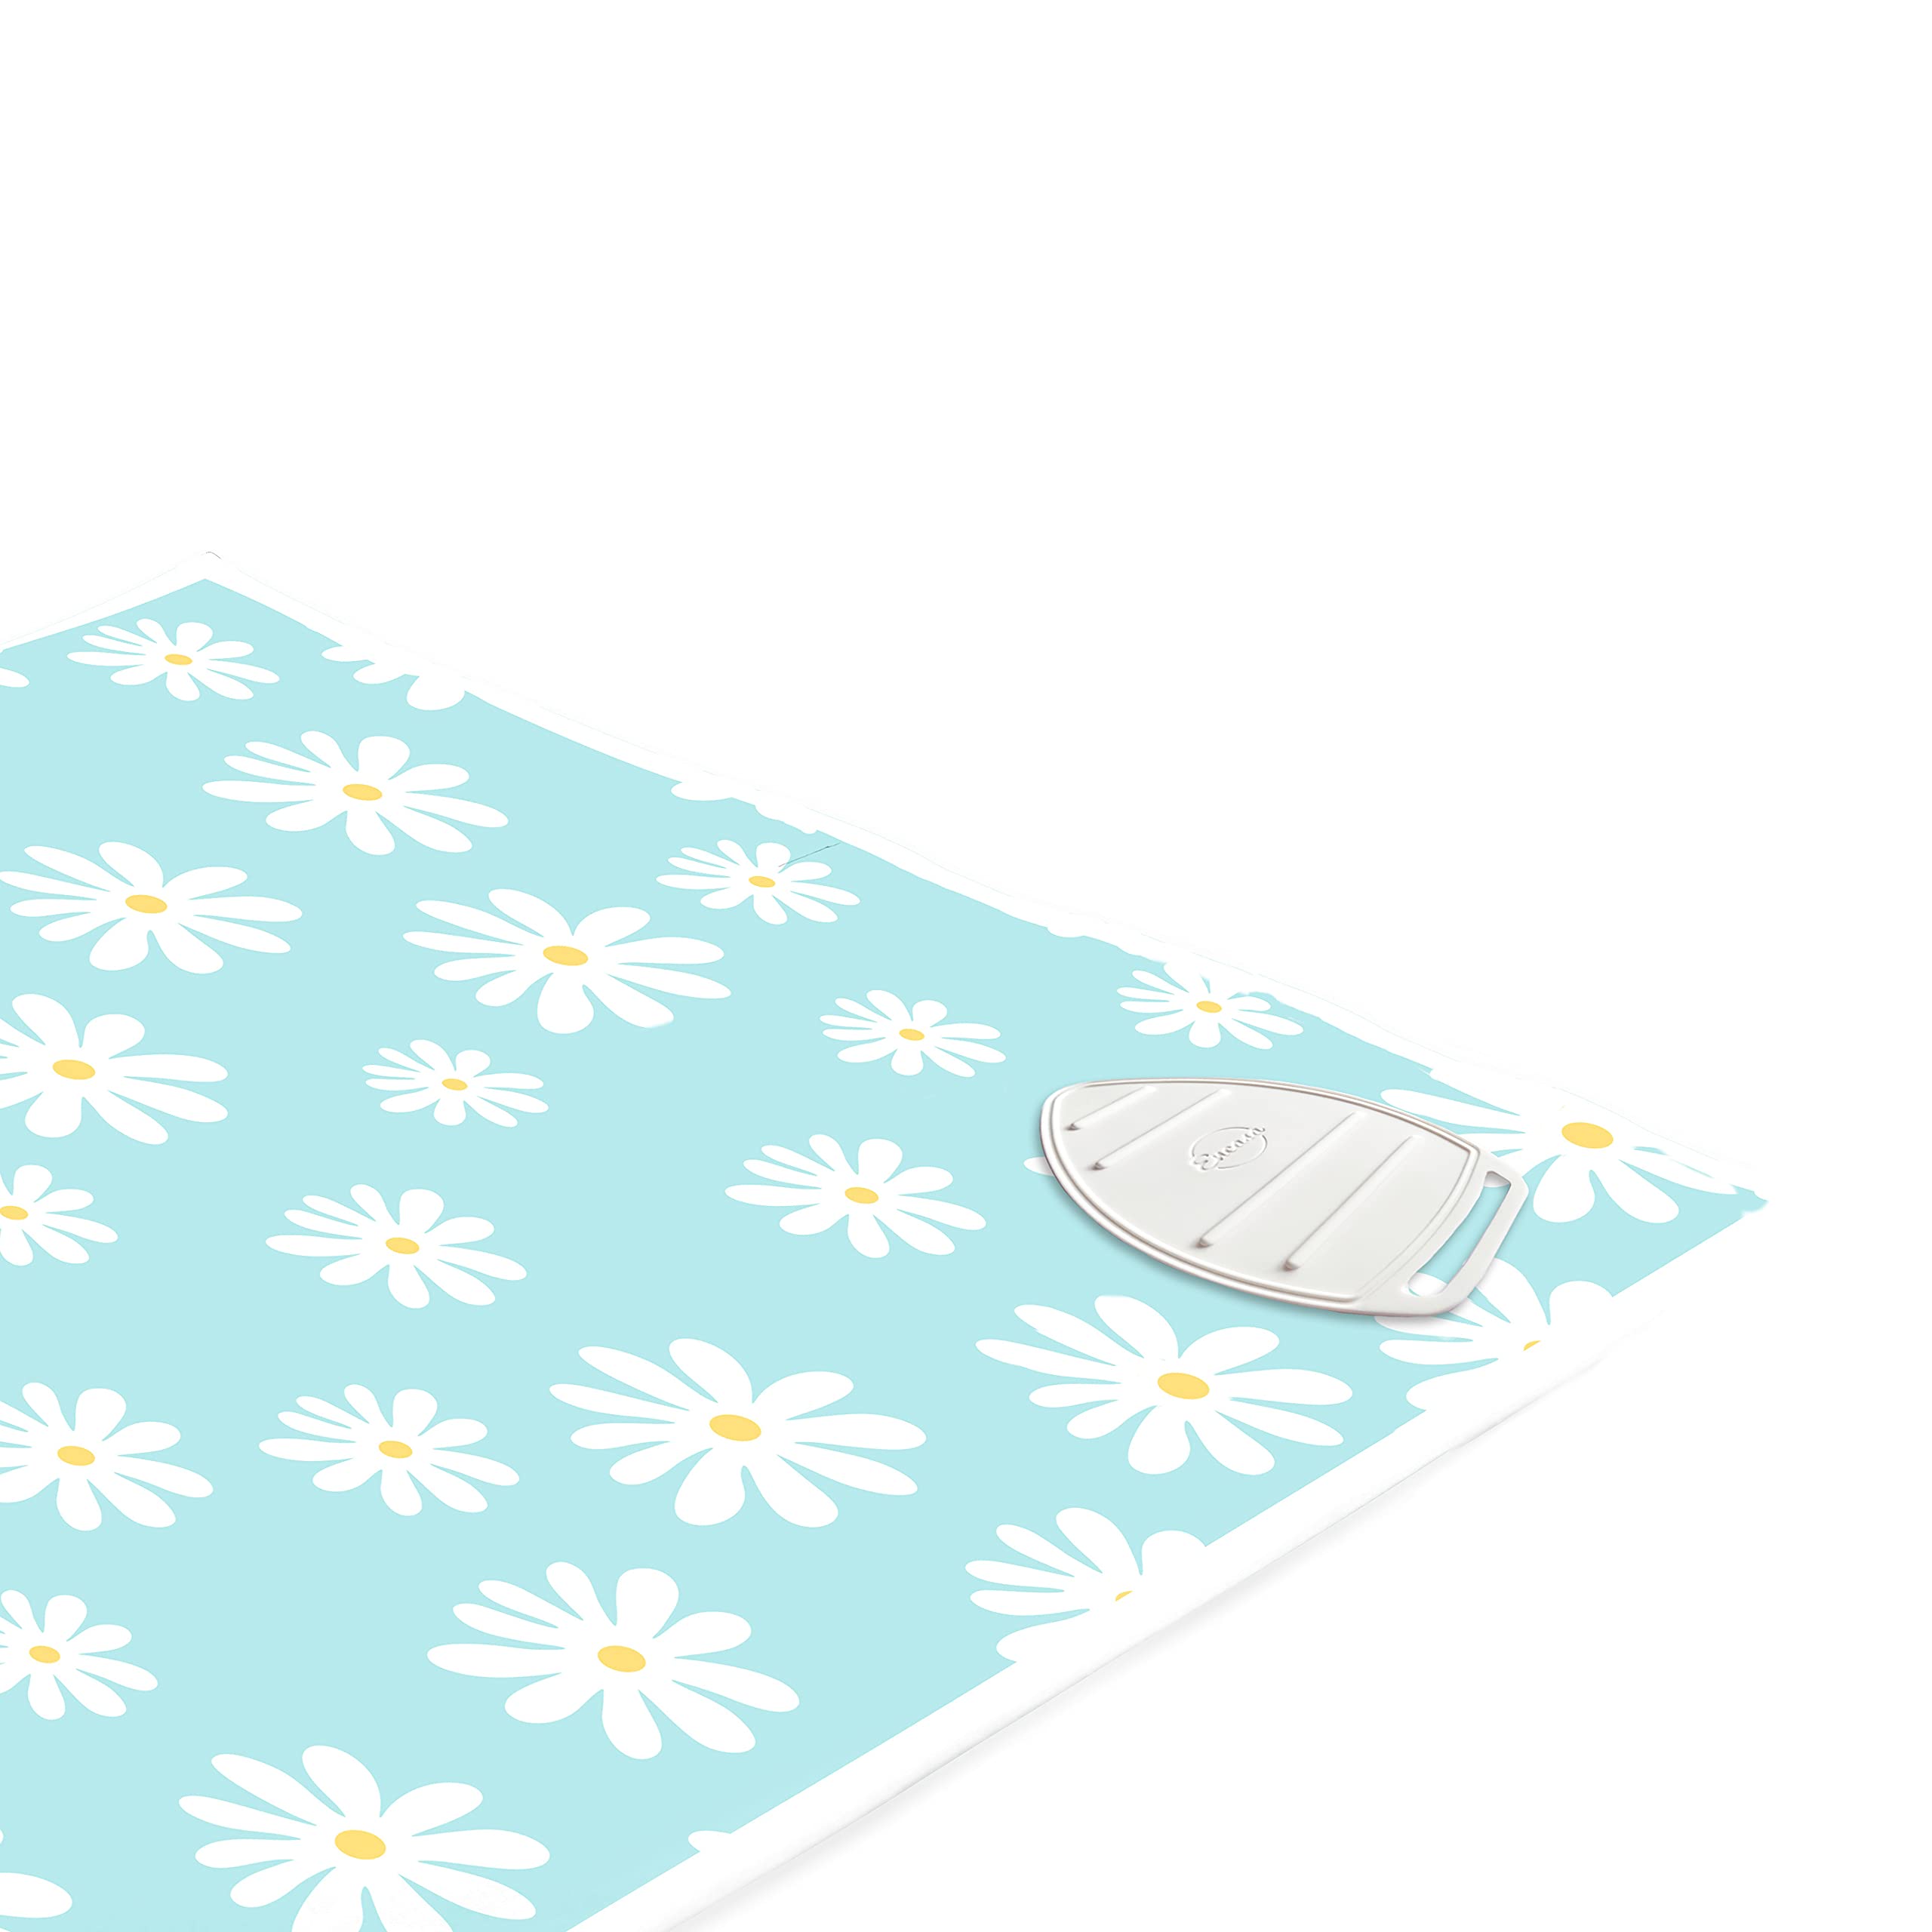 Encasa Homes Ironing Mat (Large 120 x 70 cm) with 3mm Felt Padding, Silicone Iron Rest Protector, Steam Press on Table, Bed, Portable, Heat Reflective, Foldable, Washable, Printed - Big Leaves Blue